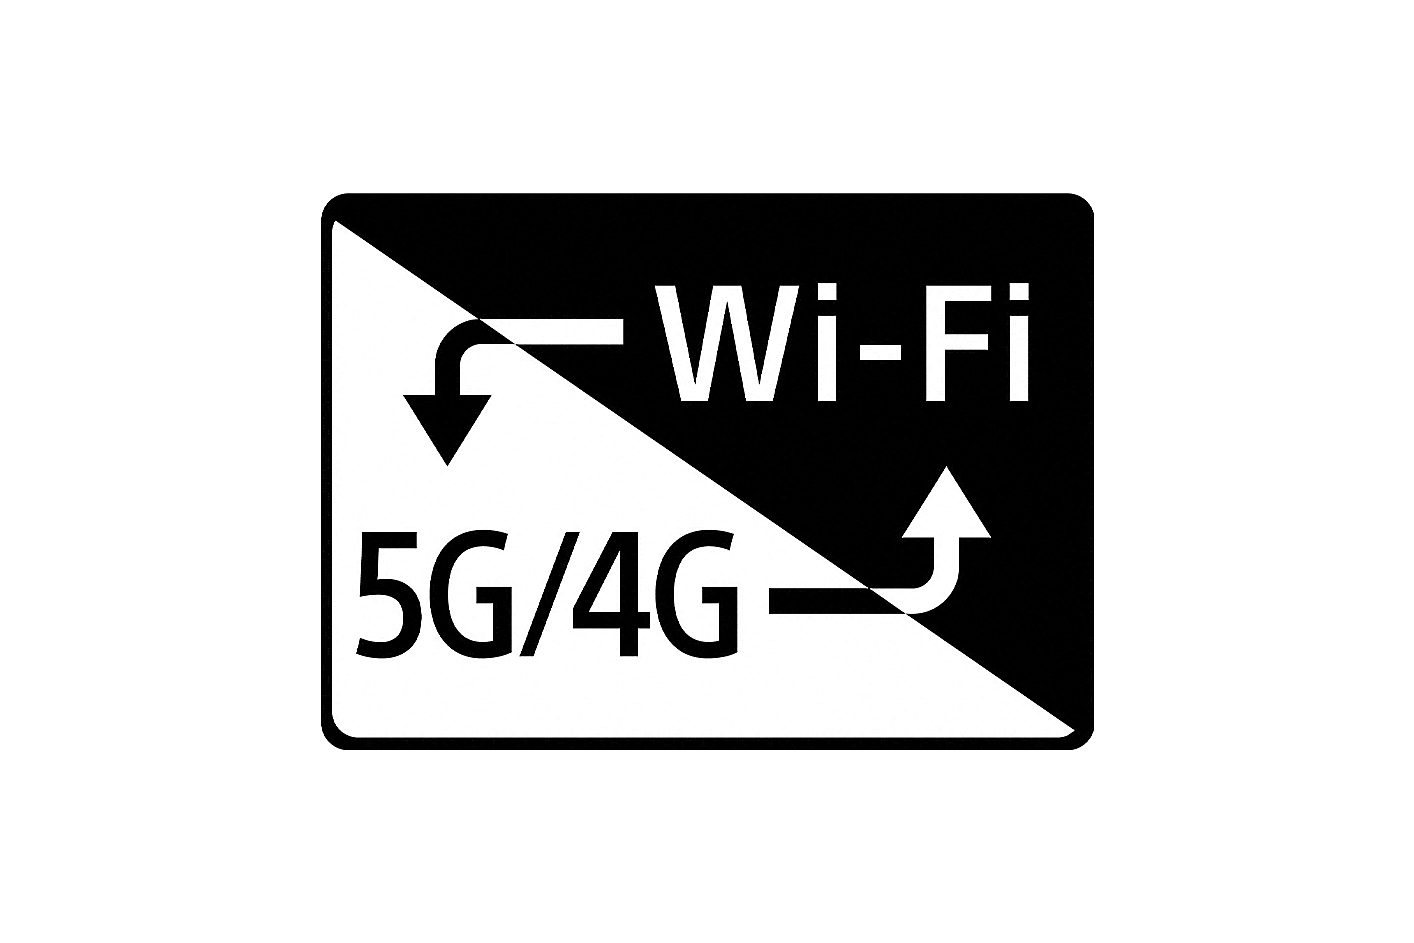 Image of Wi-FI and 5G/4G with arrows pointing to each other in a repeating pattern